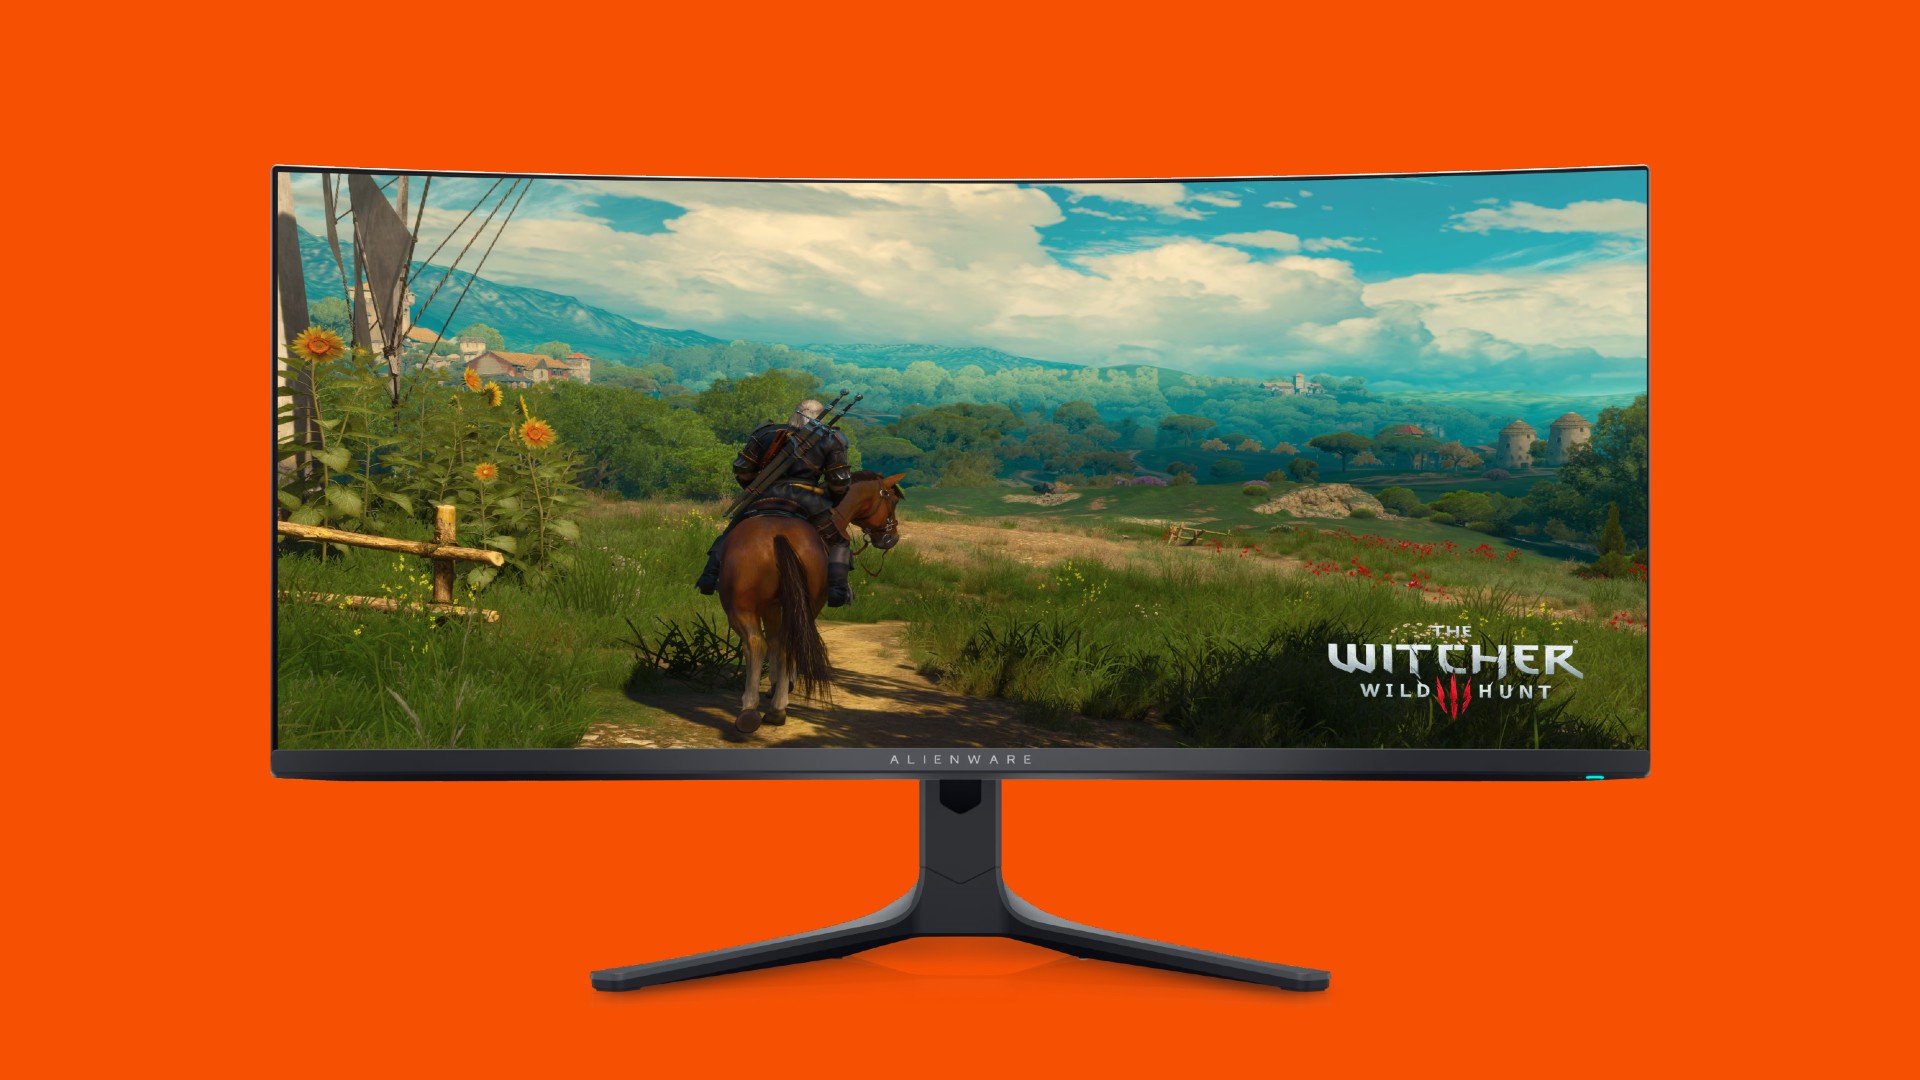 Get $100 off this Alienware OLED gaming monitor, if you're quick